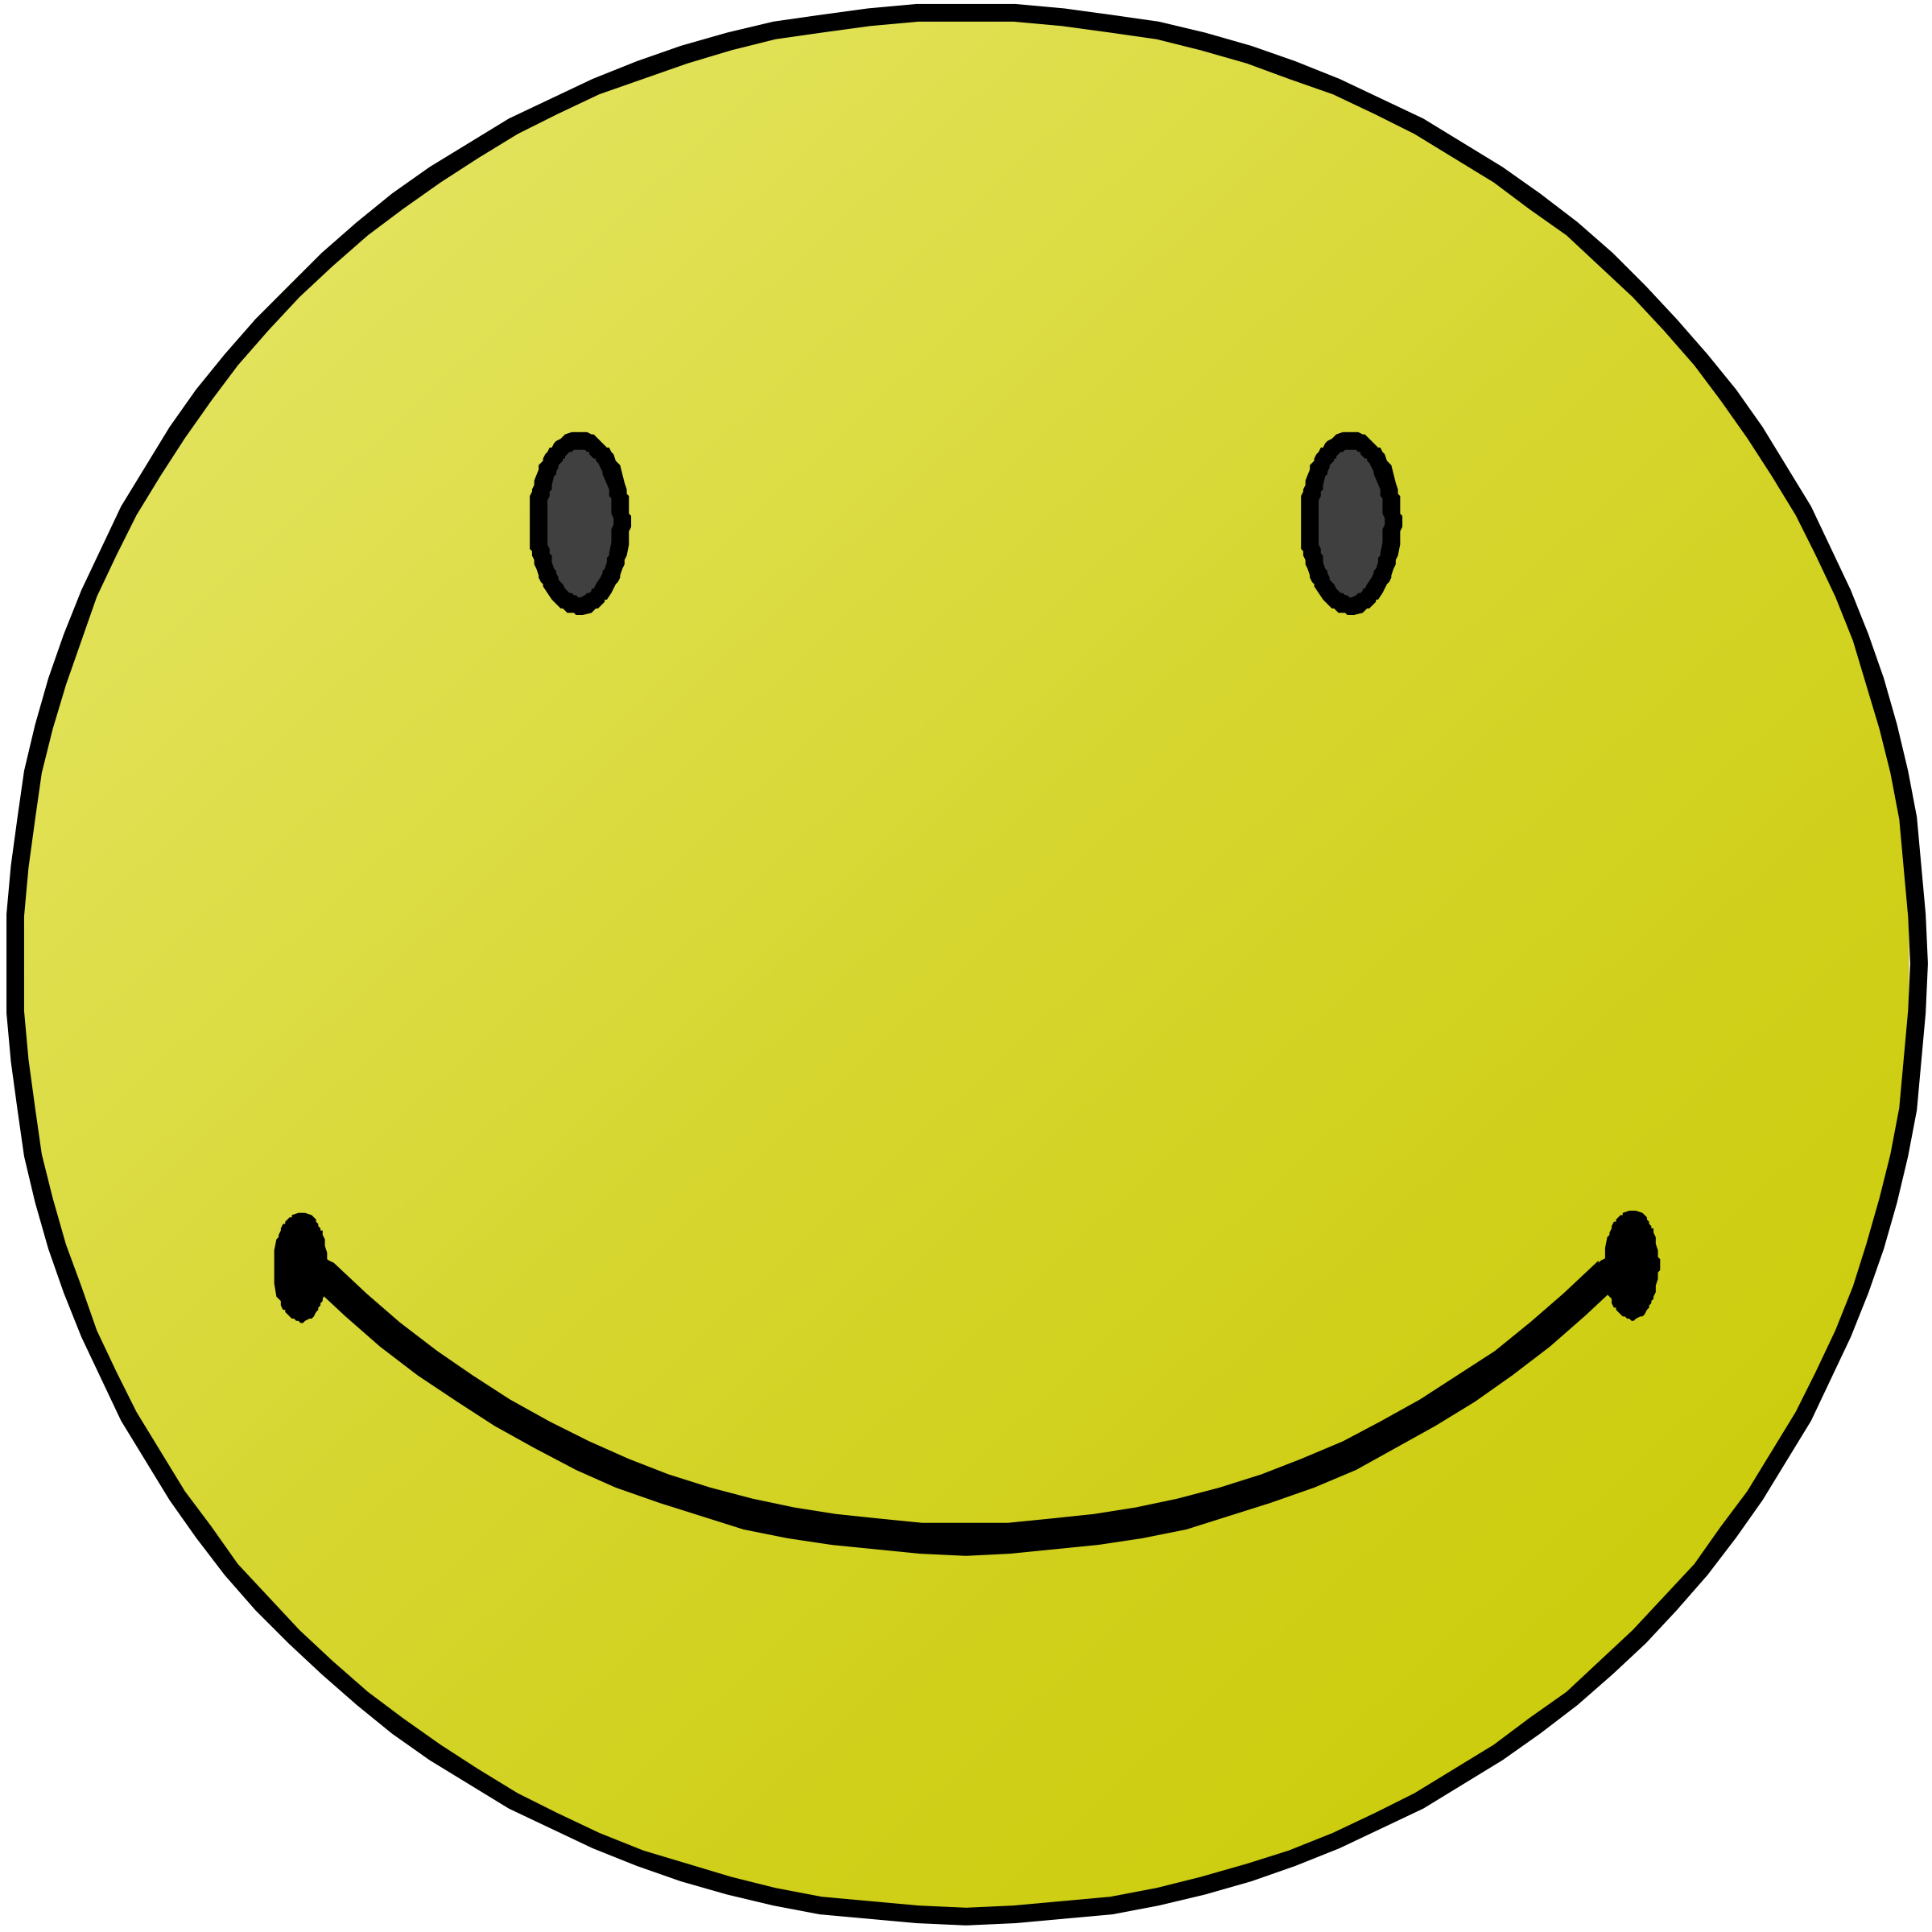 smiley face Clipart | Clipart Panda - Free Clipart Images